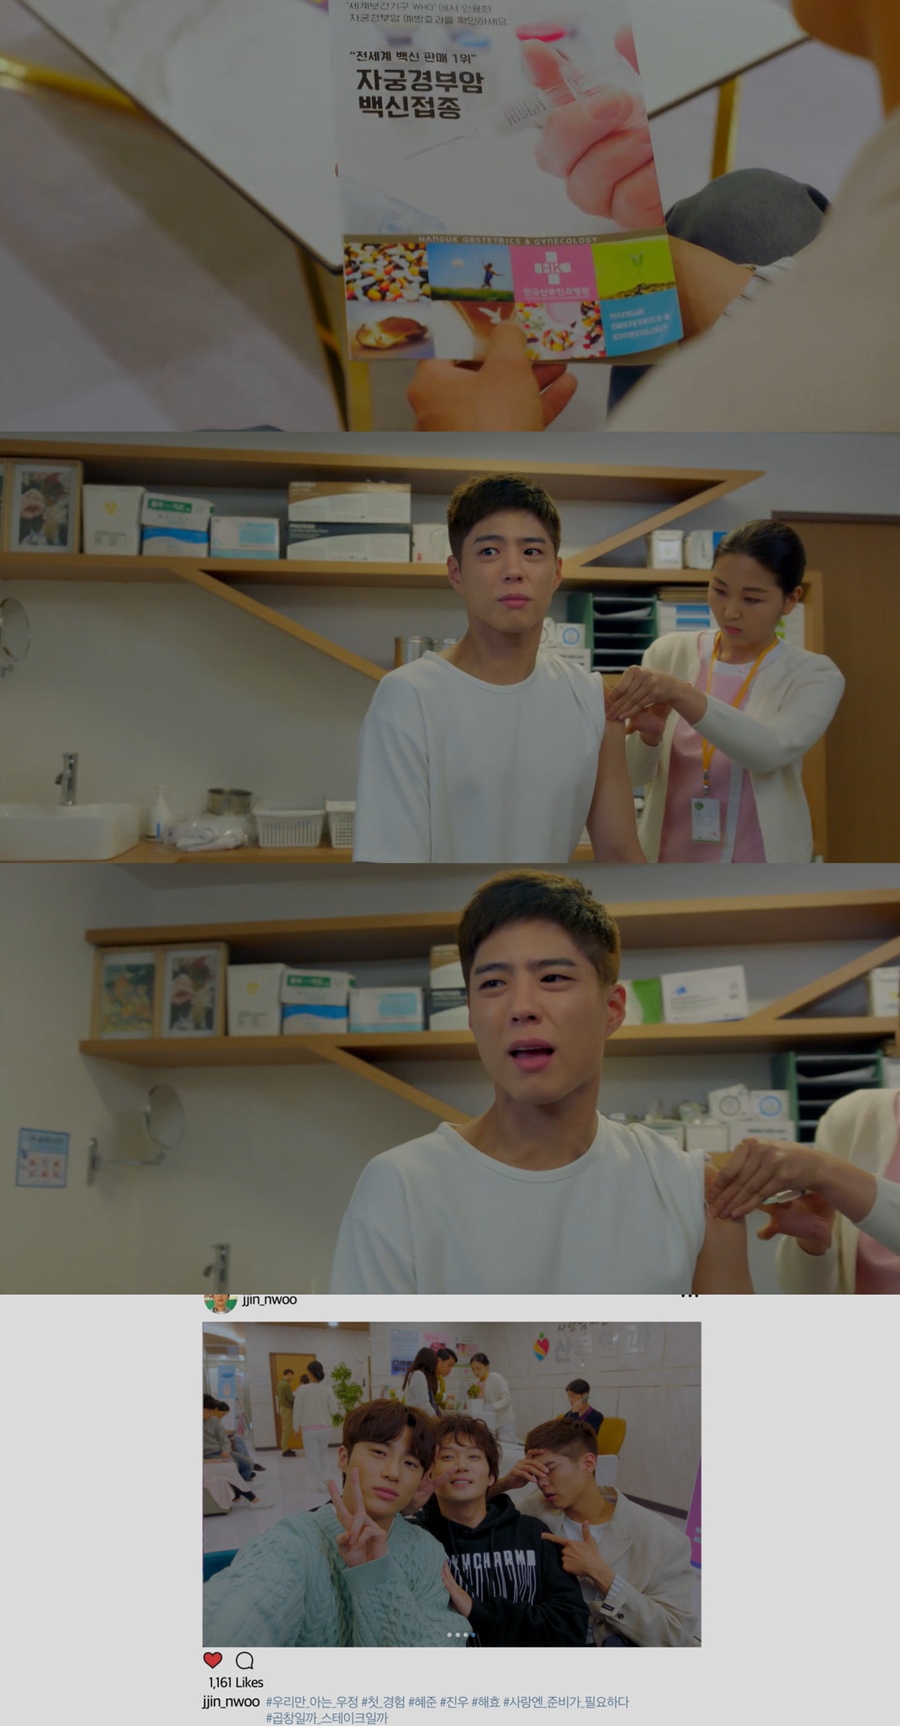 In the TVN drama Record of Youth, Park Bo-gum and other male performers are gathering topics with the appearance of a scene where Cervical Cancer Vacination is met.In the TVN Monday drama Record of Youth, which was broadcast on the 15th, Park Bo-gum was shown with friends to receive a Cervical Cancer shot at the hospital.Kim Jin-woo (Kwon Soo-hyun) was asked by the woman Friend One (Cho Yu-jeong) and brought together the friends.On the day of the broadcast, Hannah Jeter asked Kim Jin-woo for a Cervical Cancer Vacination.Kim Jin-woo was embarrassed and said, I do not have a womb because I have a shot. However, Hannah Jeter said, It works if it does not work. I hope my brother will take three stamps soon.It should be hit three times, he stressed.Kim Jin-woo prided himself on being clean, but Oneah Jeter said: I dont want to get caught with a Cervical cancer.I need proof, so get the vaccine. He said, closing Kim Jin-woos mouth.In the end, Kim Jin-woo called Friend Sa Hye-joon and Won Hae-hyo (Byeon Woo-suk) to the hospital and even made a reservation to get them vaccines. It is not just a vaccine for women.It is the same prevention even if men are right, said Friends, and Sa Hye-joon laughed at the injection.The three people posted a picture of the three together on SNS and added a hashtag called I need to prepare for love.It is like a scene of public service advertisement, but the message that men need to prevent Cervical cancer is clearly imprinted, and the reaction of hot viewers after broadcasting continued.Cervical cancer is on the portal site real-time search term, and the netizens also responded that they first realized that men should receive Cervical Cancer Vacination.In particular, there was a question about whether it was a Vacination campaign or a Cervical cancer prevention injection PPL.The scene is not inserted for the PPL, an official of the Record of Youth said on the 16th.Record of Youth continued to rise steadily since its first broadcast, and the last four broadcasts recorded a whopping 7.8% (Nilson Korea national standard).Thanks to the fact that many viewers have received such information, the popularity of the popular drama is poured out, so expectations are gathered for future development.=